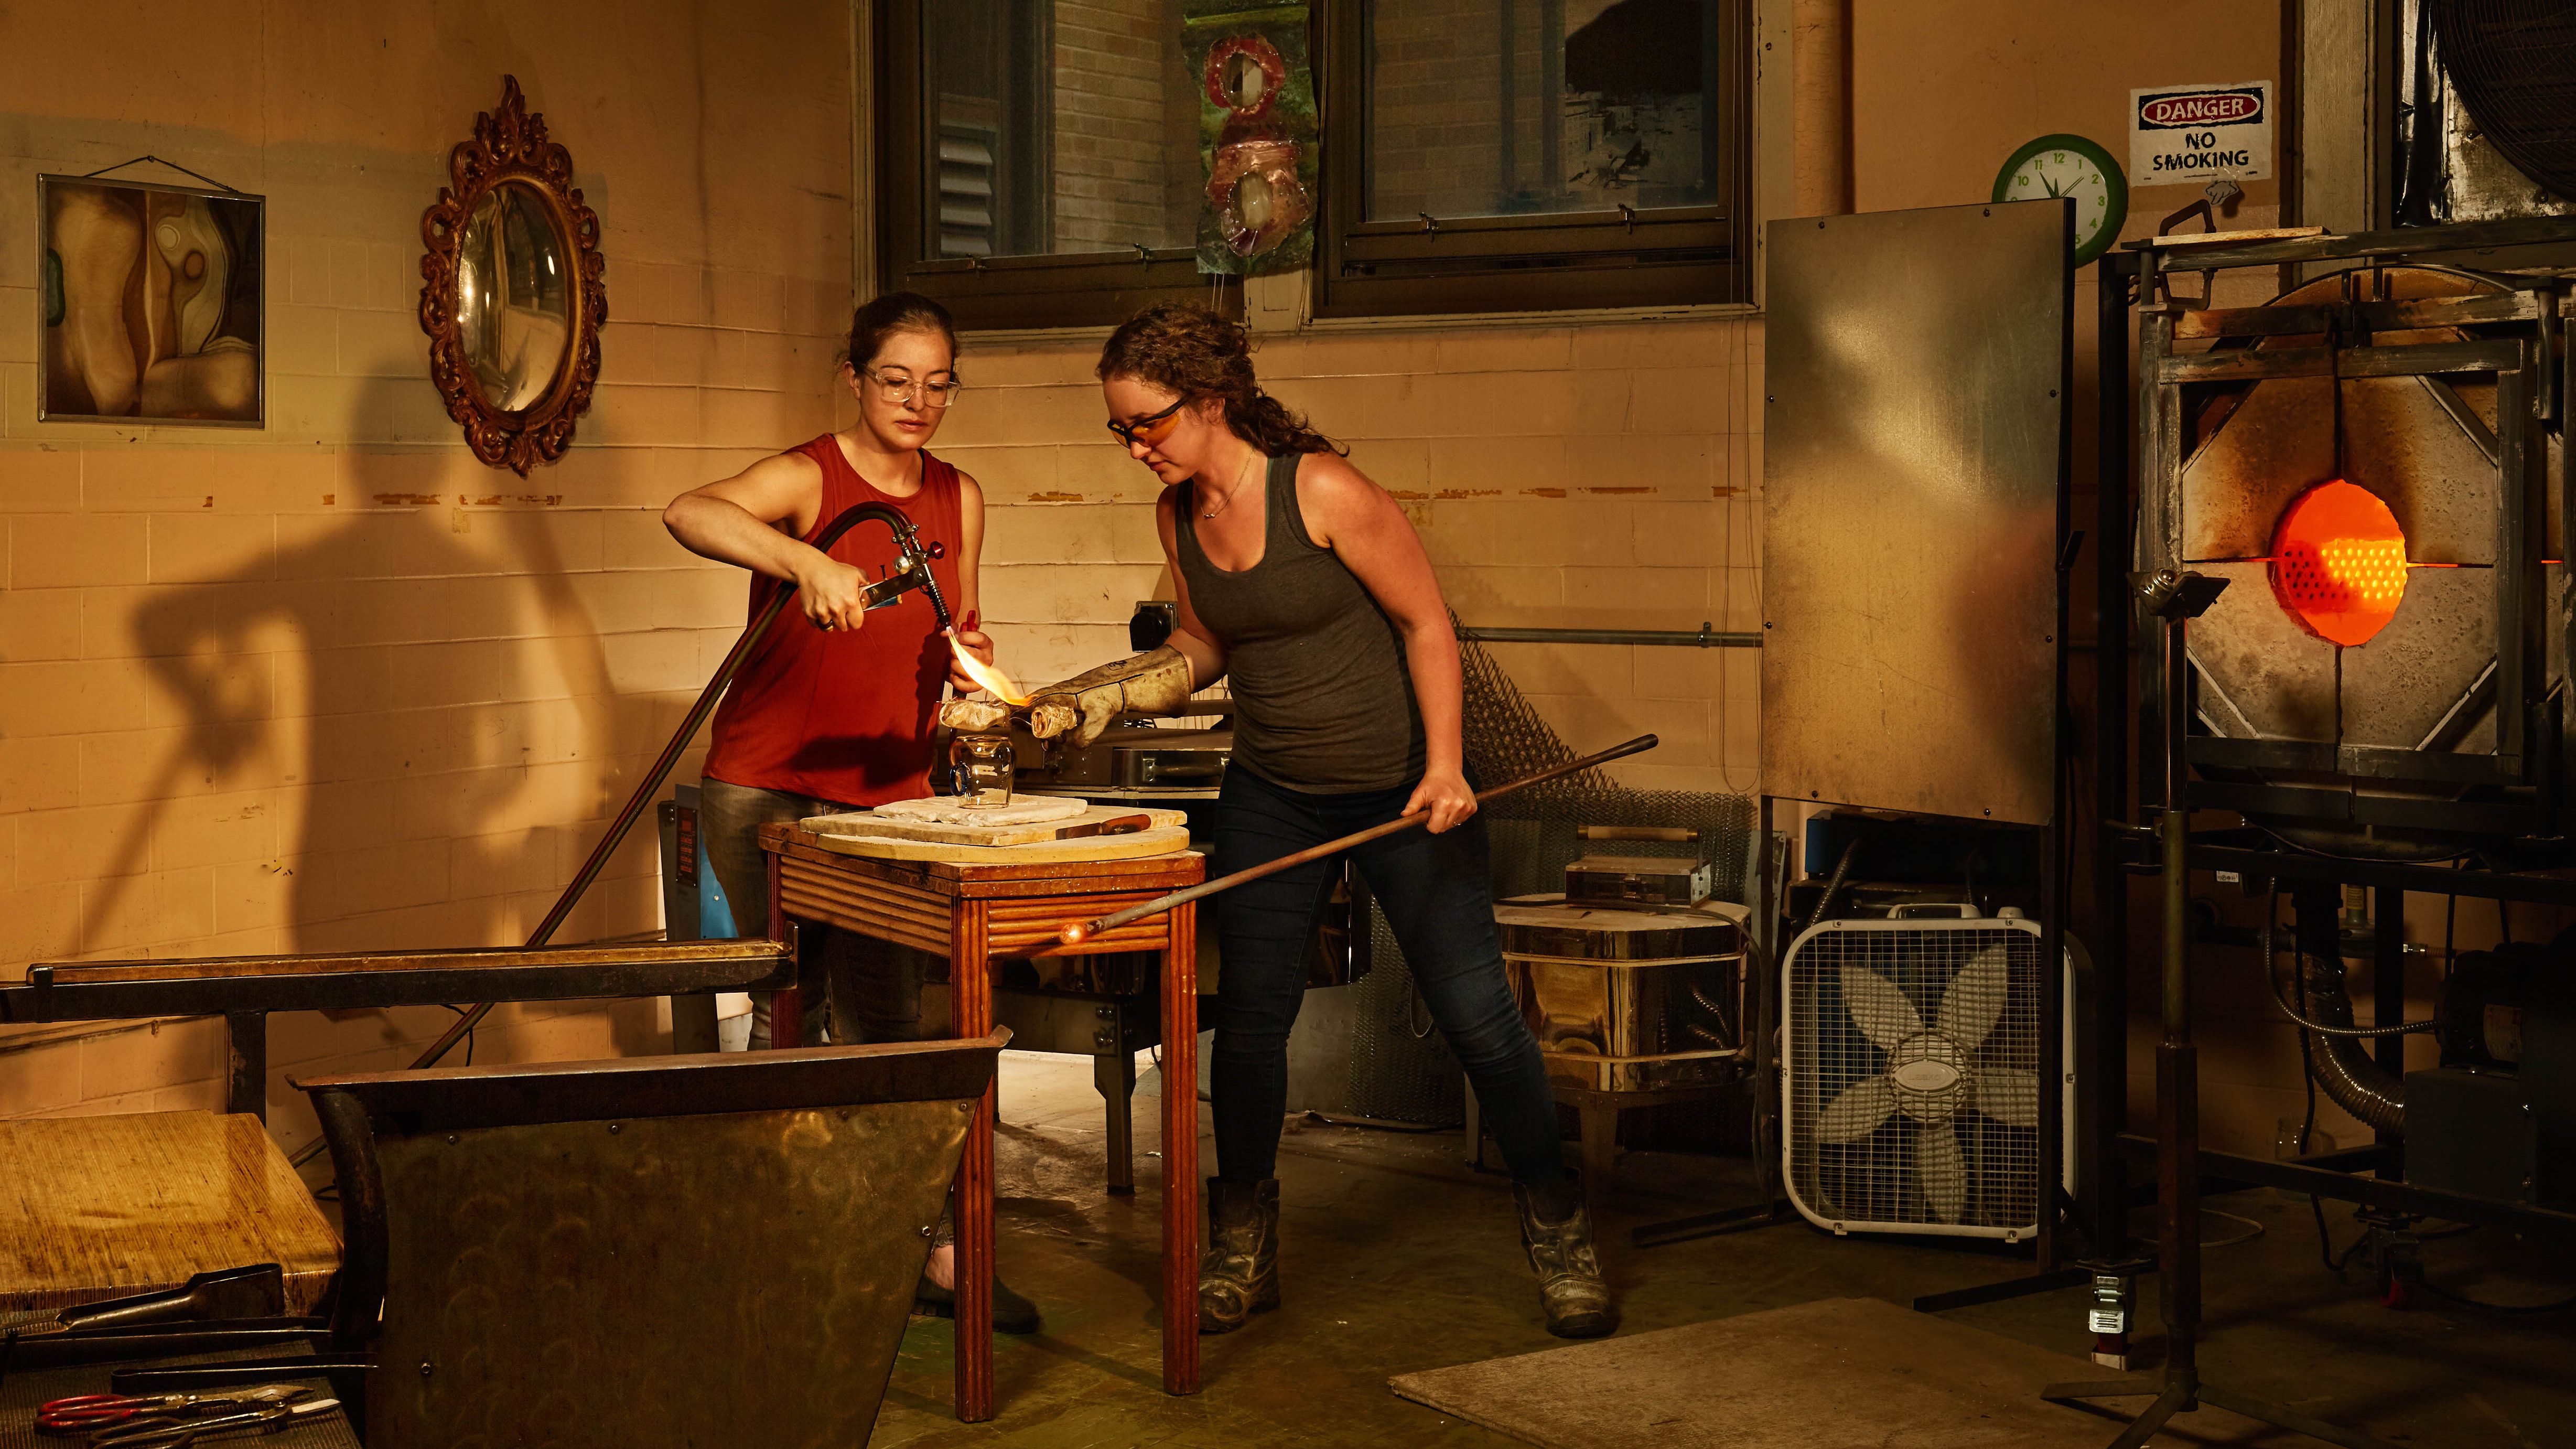 Glass Blowing Class (Non-Credit)